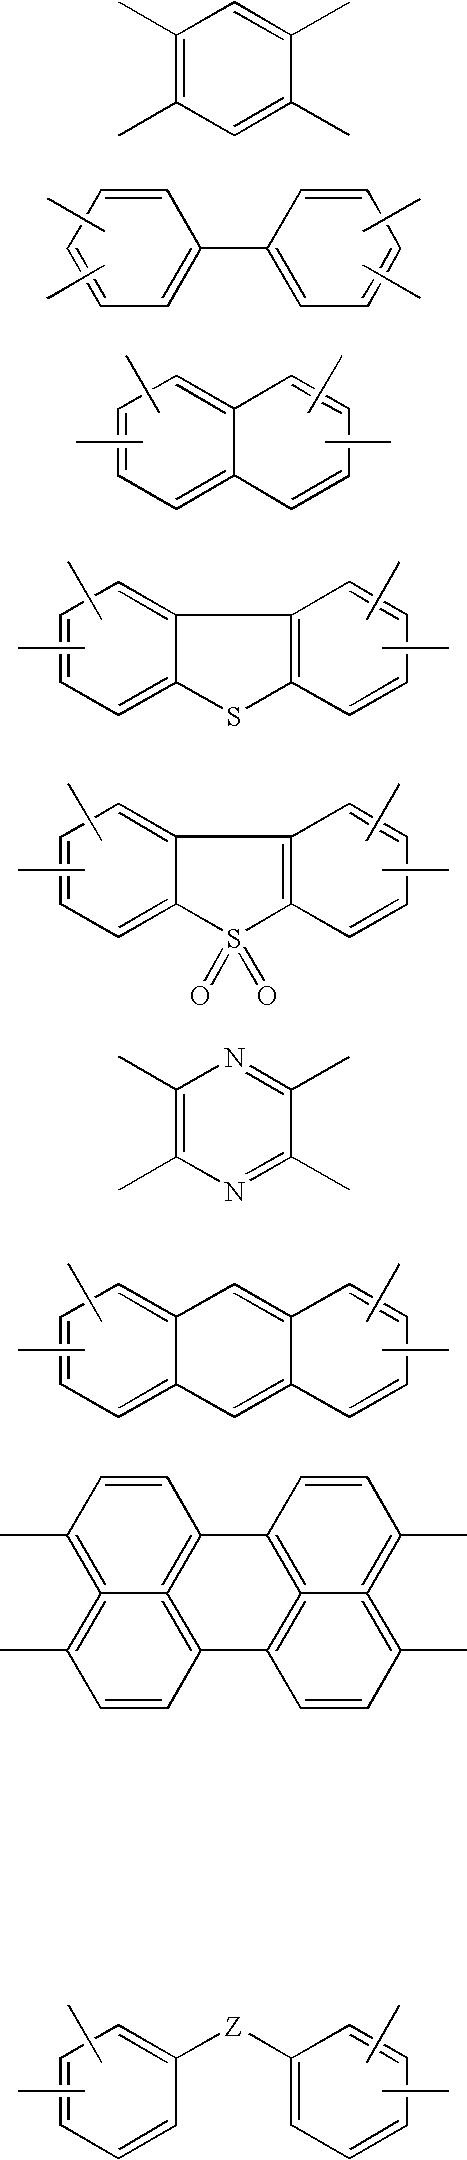 Polyimide membranes